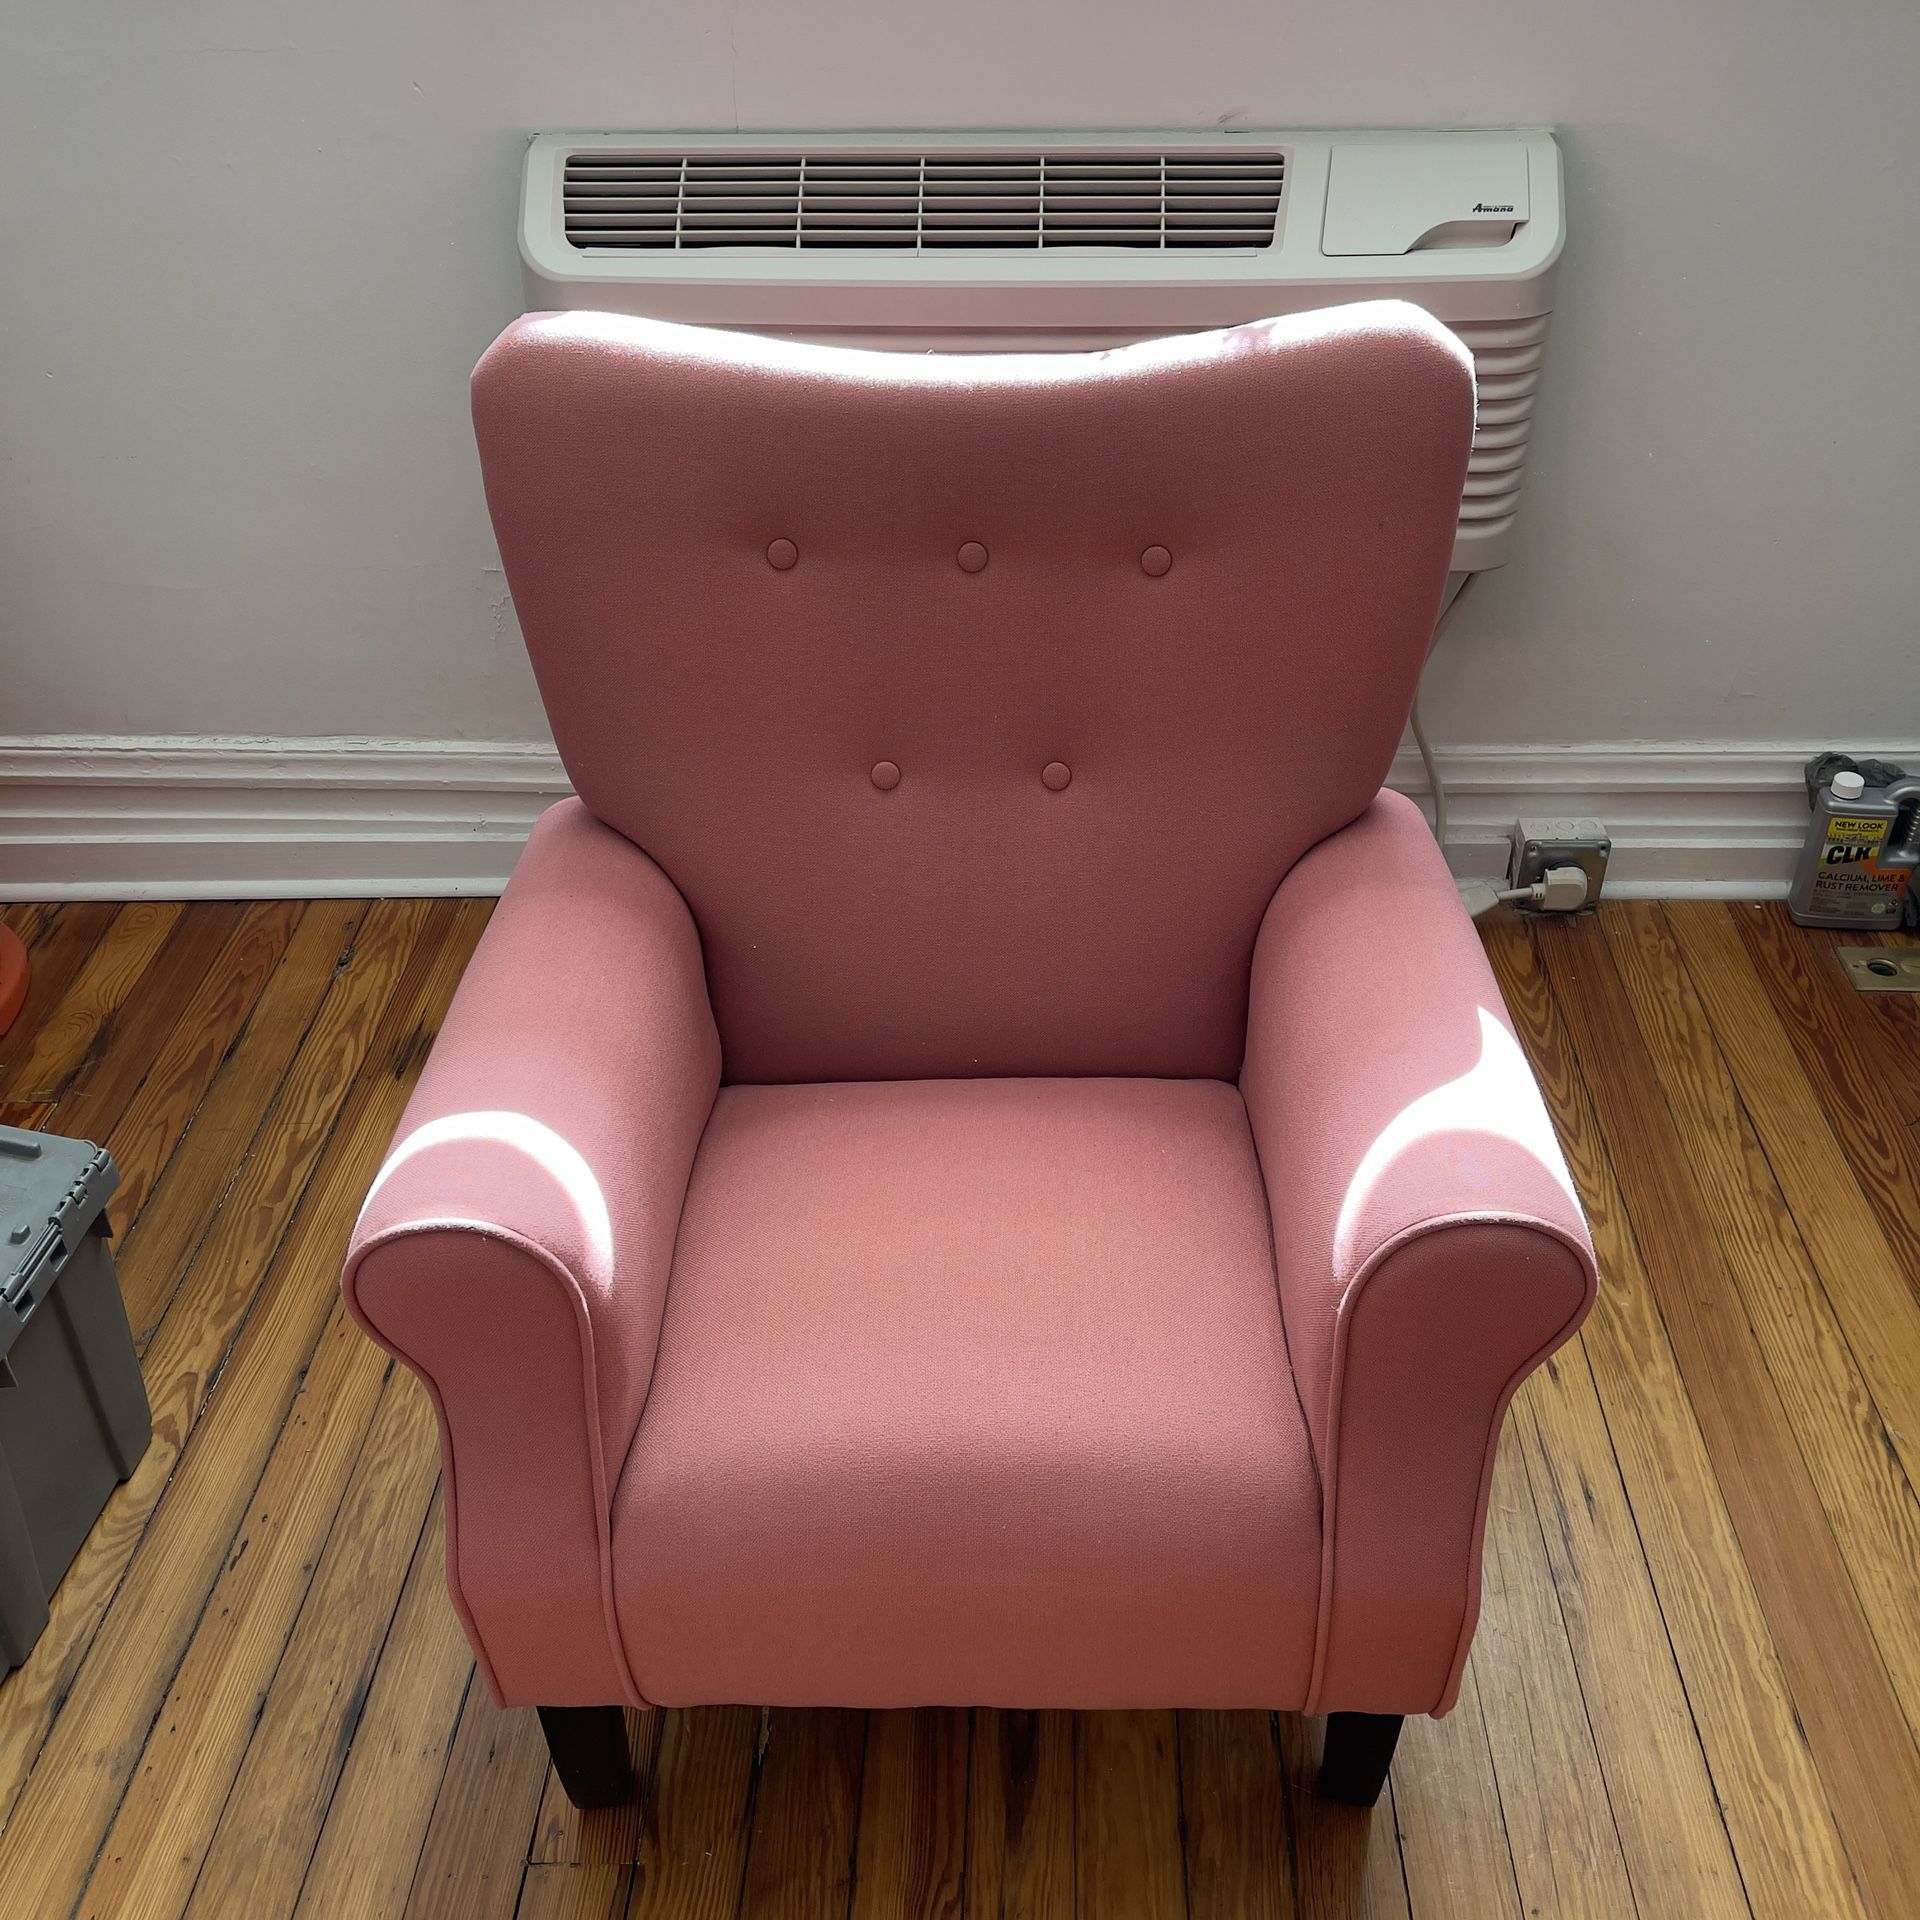 Coral Pink Chair